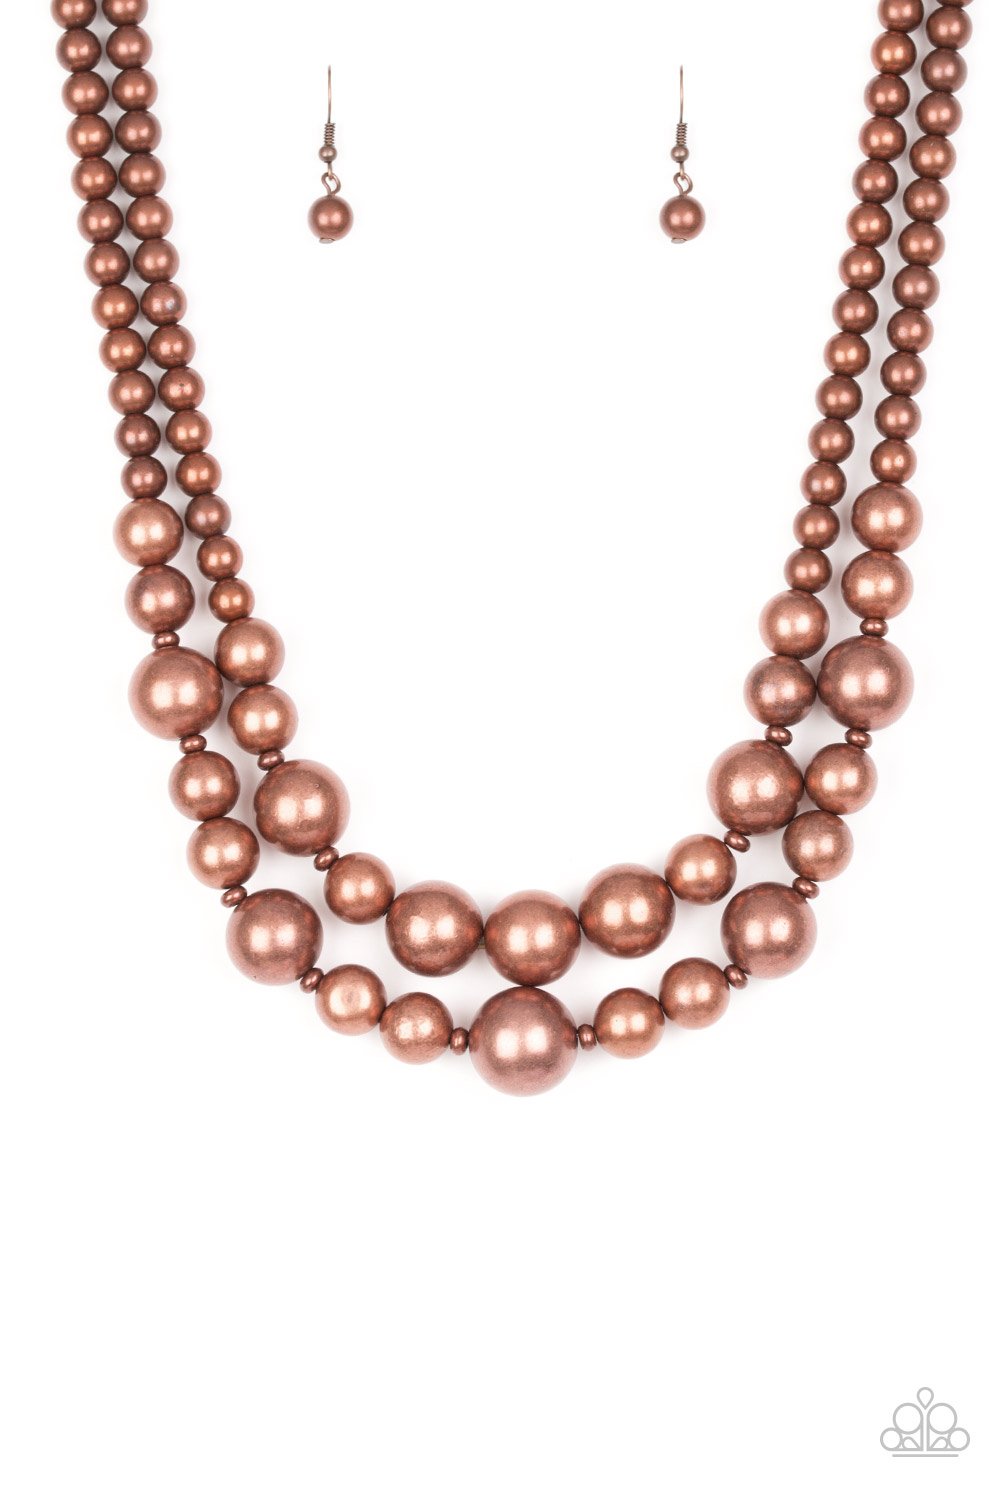 Paparazzi I Double Dare You - Copper Necklace - A Finishing Touch Jewelry